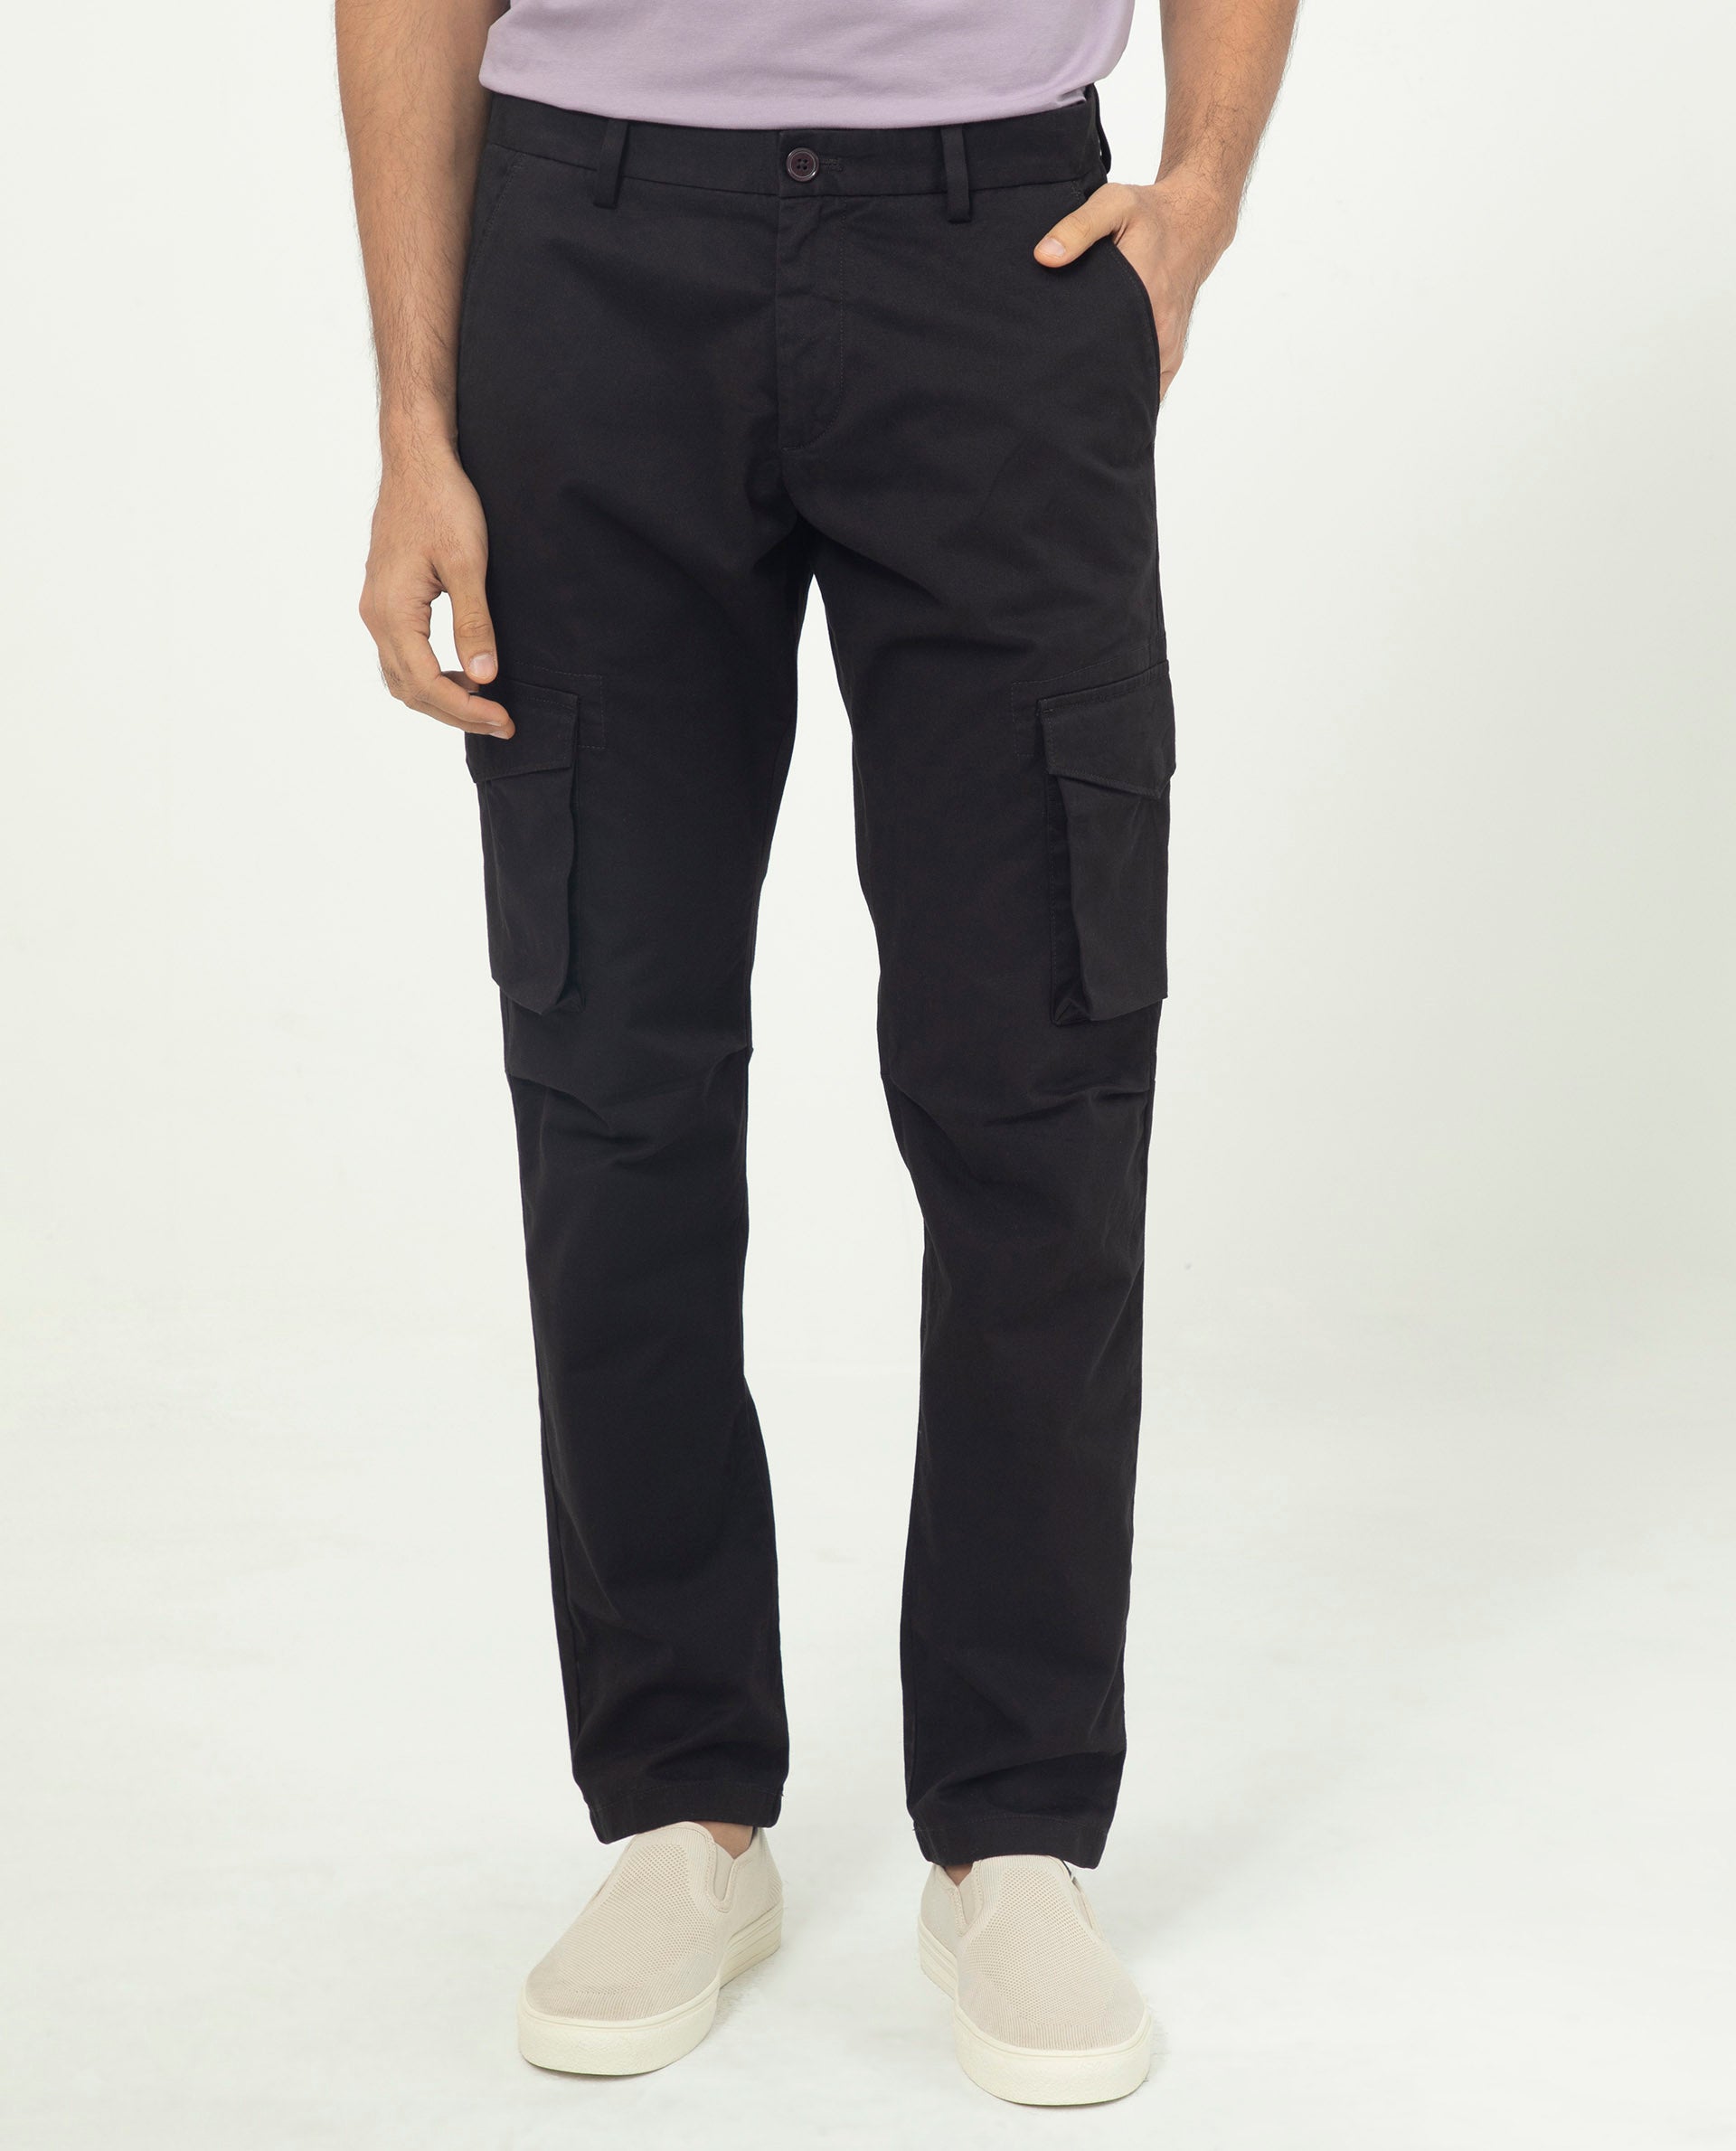 Slim Fit Zipped Pocket Cargo Pants | Streetwear at Before the High Street